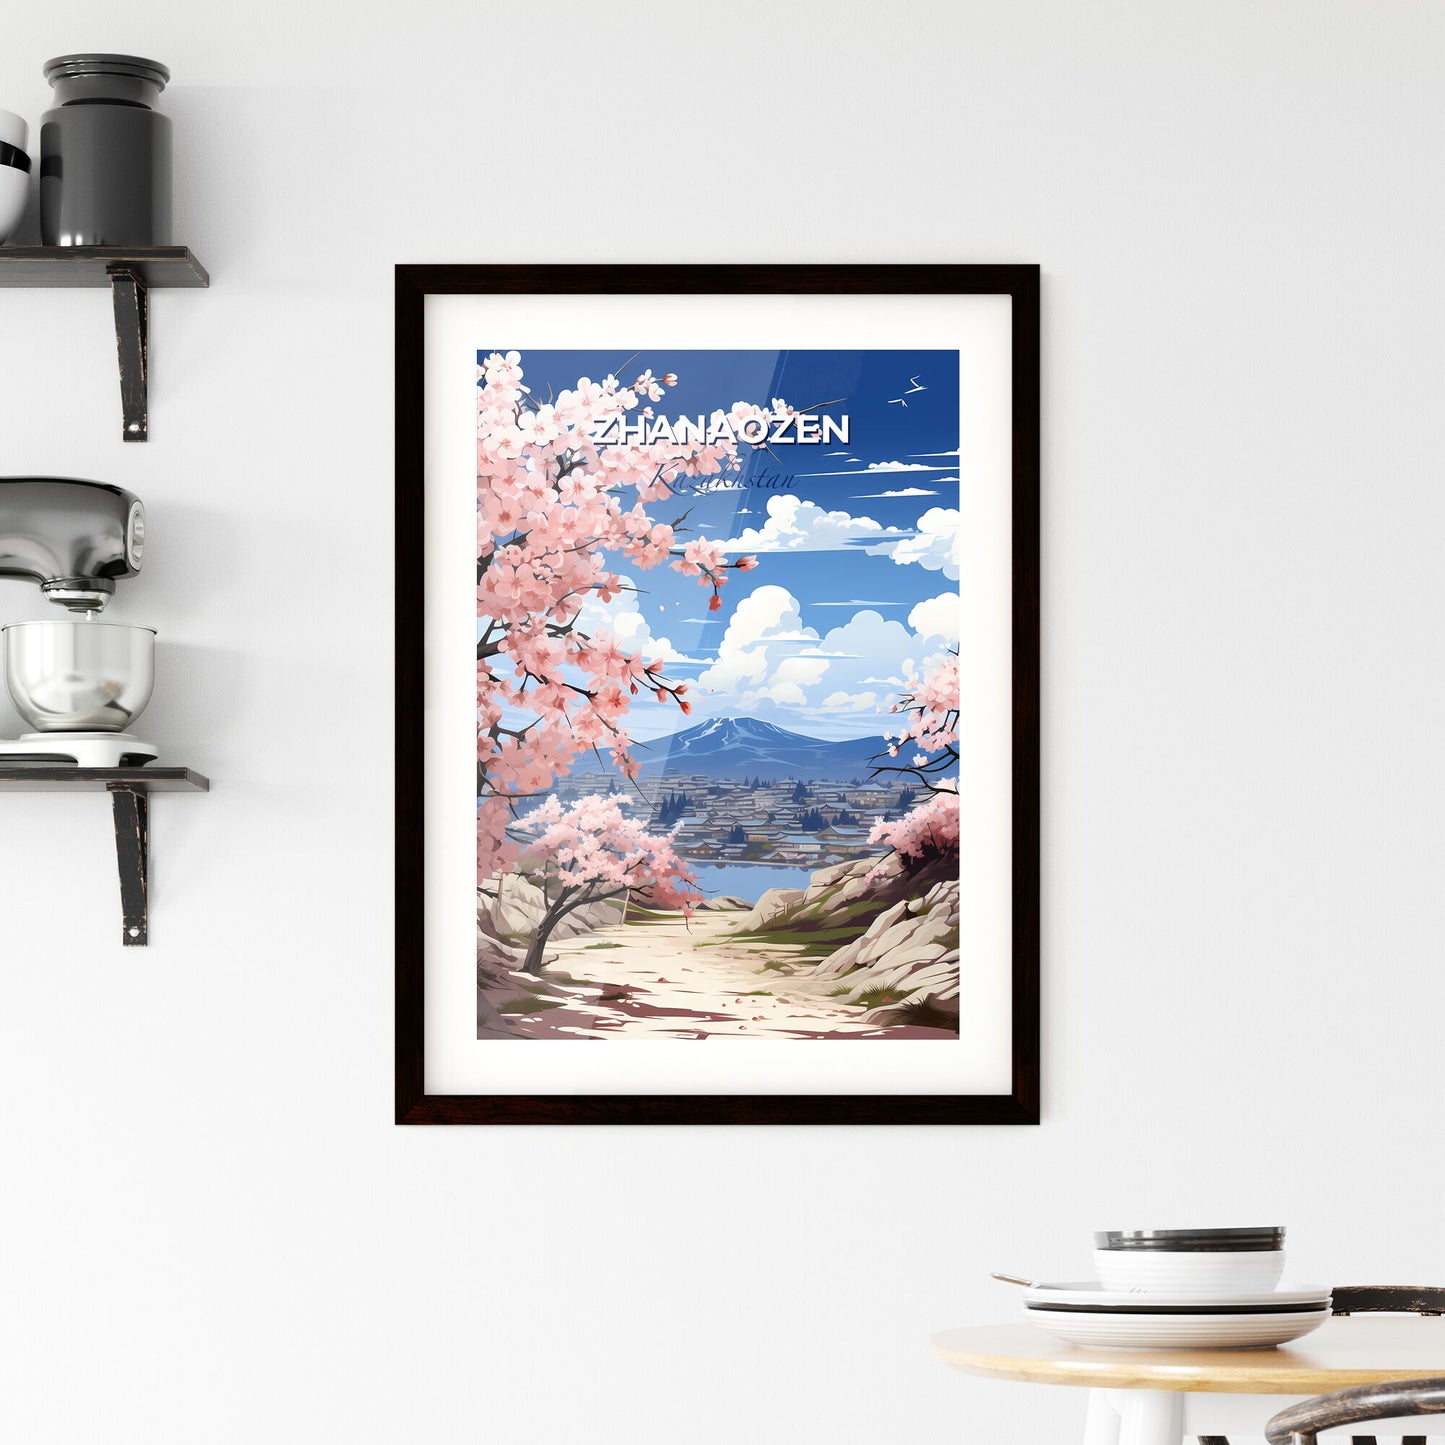 Zhanaozen, Kazakhstan, A Poster of a landscape with pink flowers and a mountain in the background Default Title